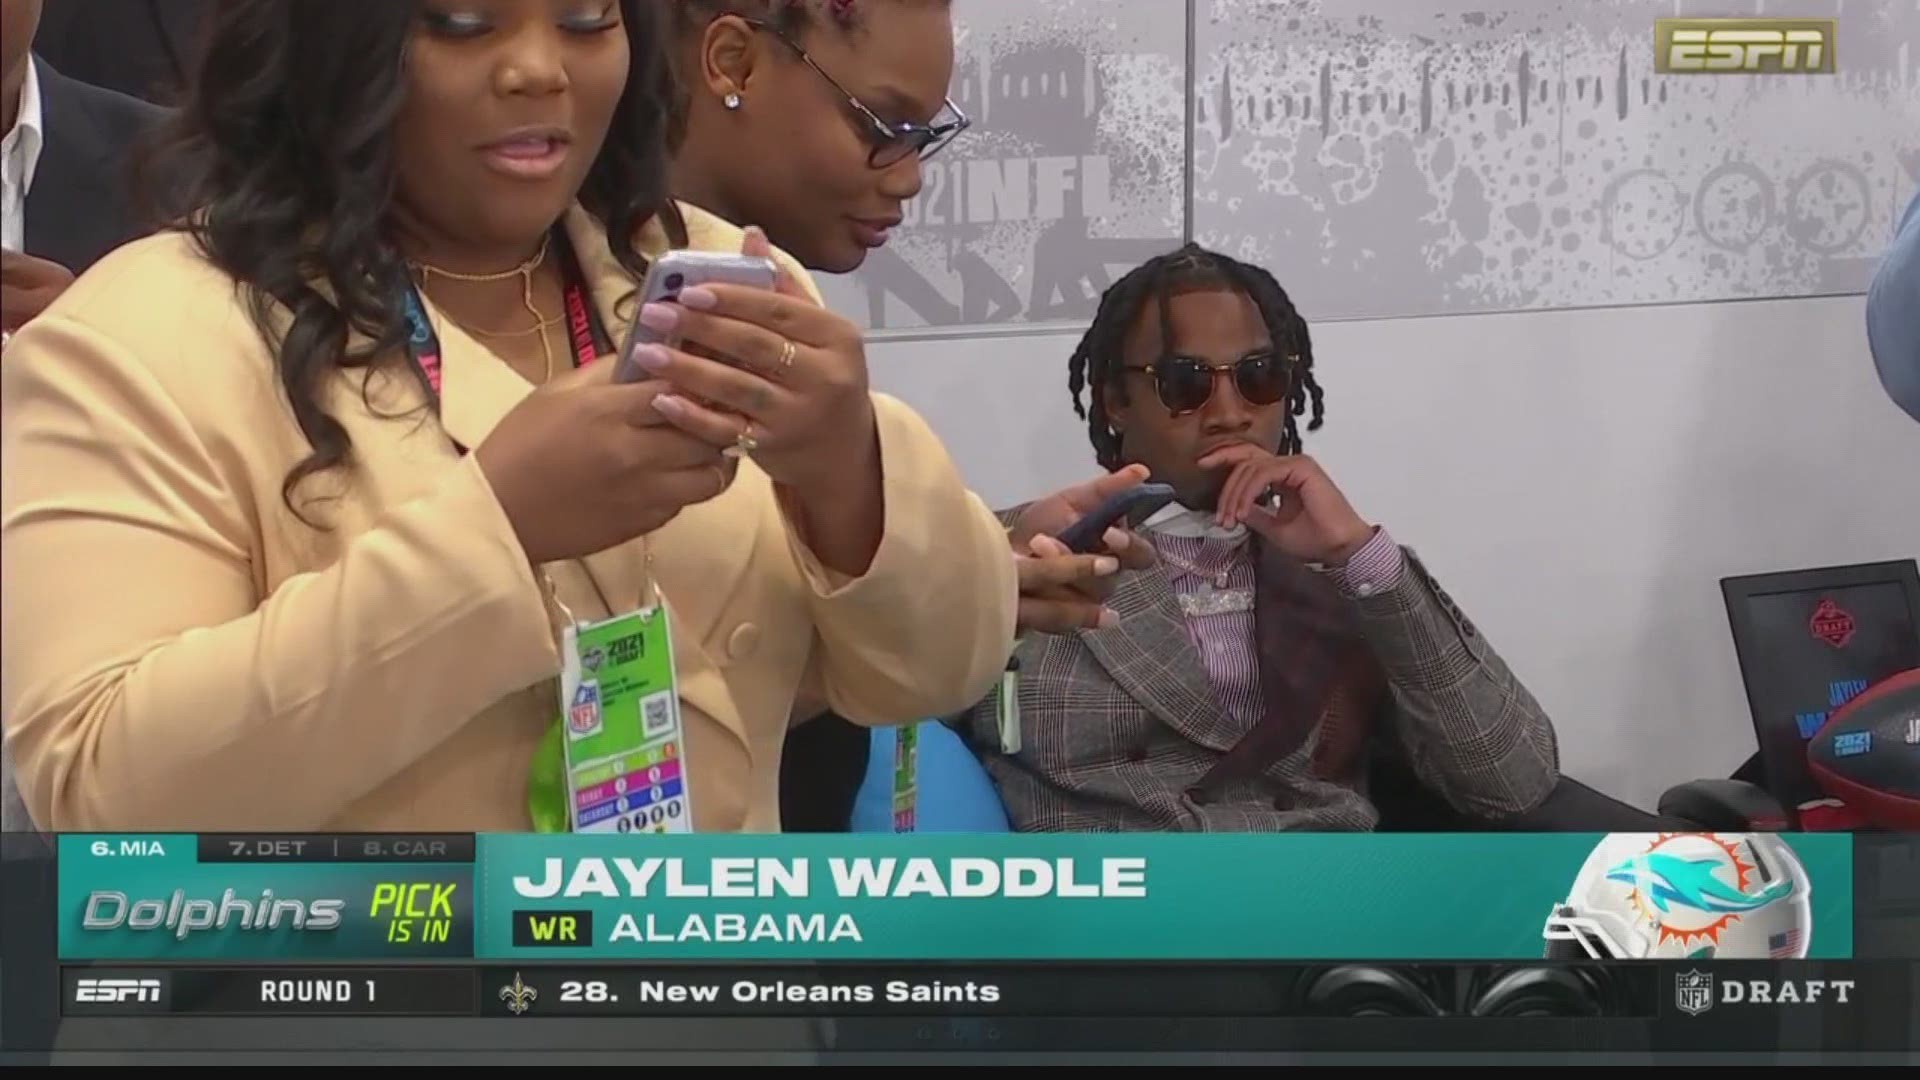 Miami has drafted Jaylen Waddle, the game-breaking receiver from Alabama, with the sixth overall pick.